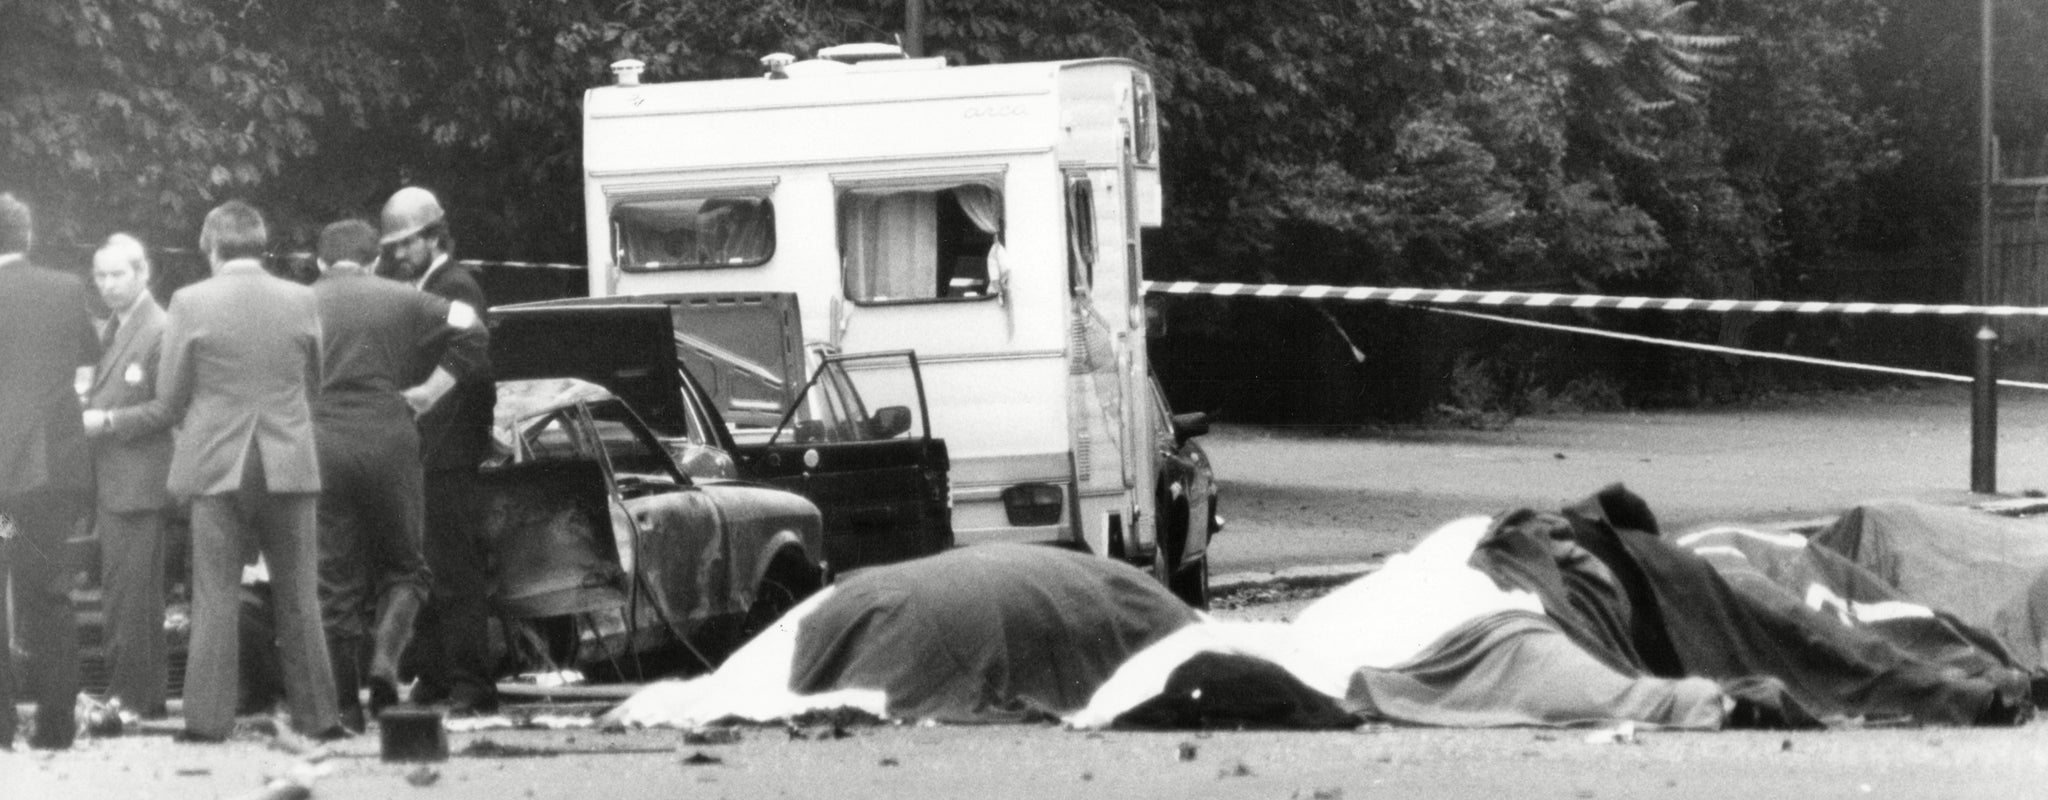 The dead horses of the Household Cavalry, after the 1982 nail bomb blast in Hyde park while they were on way to the changing of the guard at the Buckingham Palace. The IRA claimed responsibility for the attack